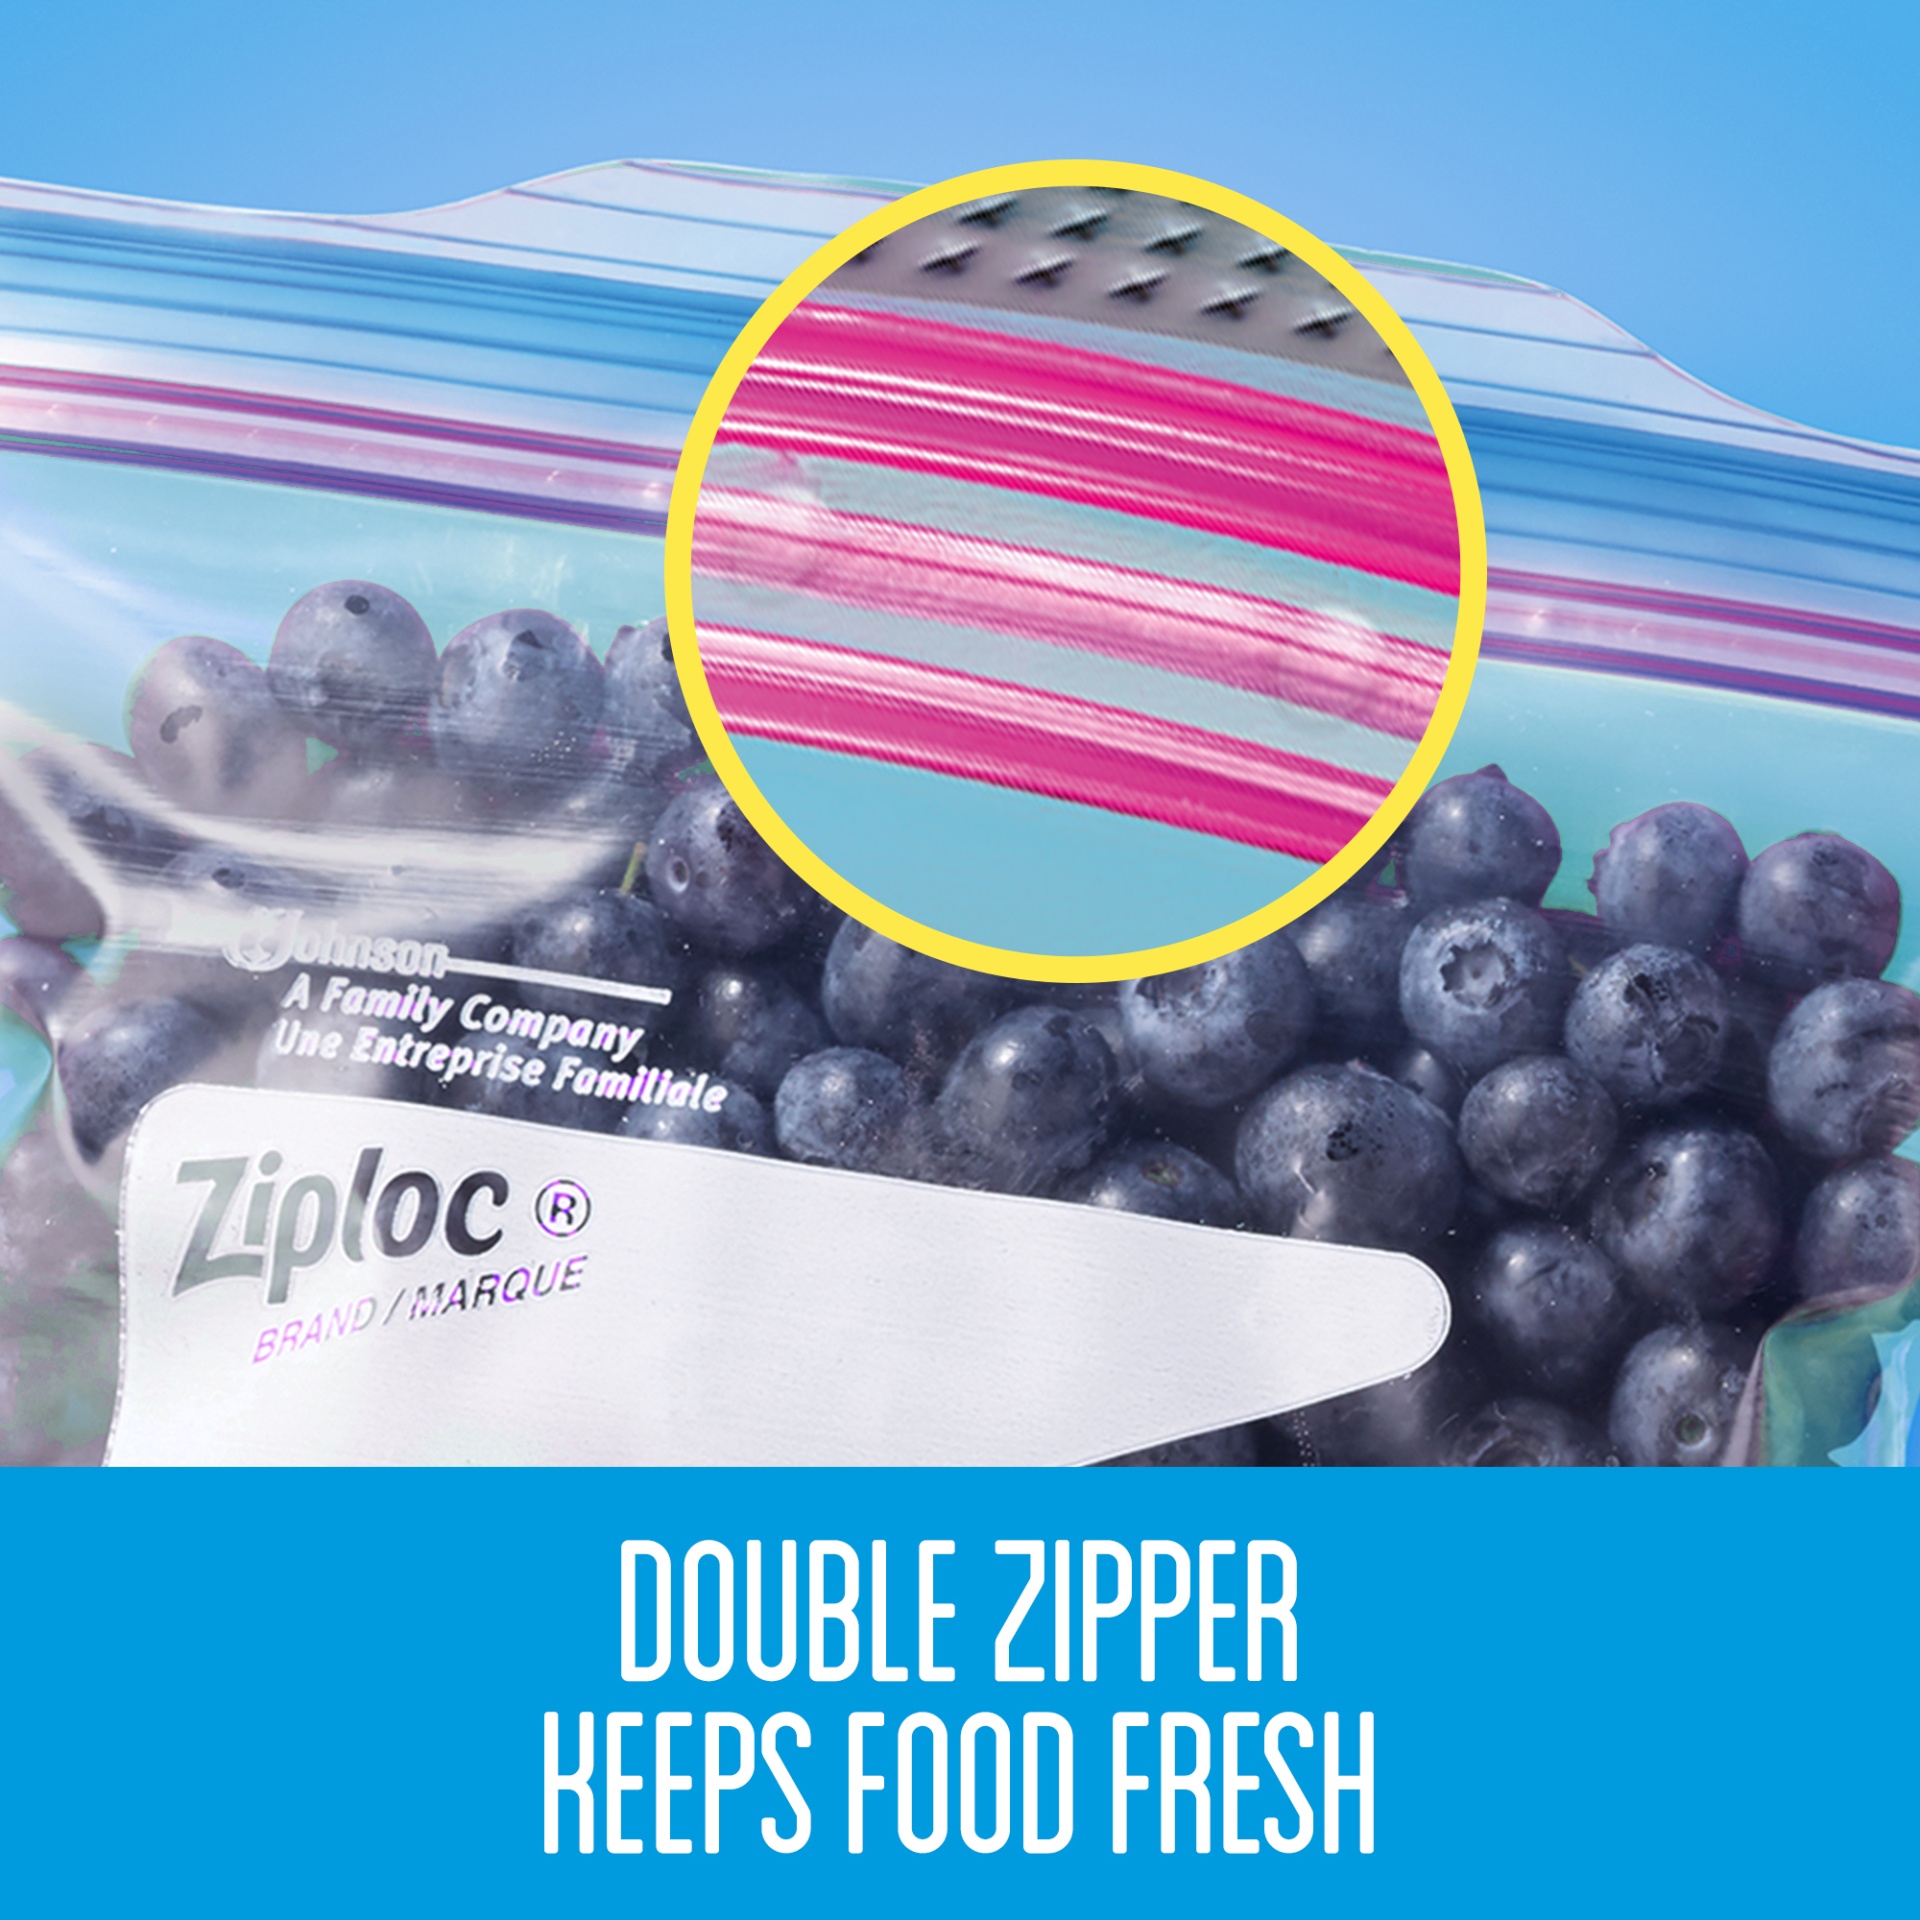 slide 7 of 7, Ziploc Brand Freezer Bags with New Stay Open Design, Quart, 19, Patented Stand-up Bottom, Easy to Fill Freezer Bag, Unloc a Free Set of Hands in the Kitchen, Microwave Safe, BPA Free, 19 ct